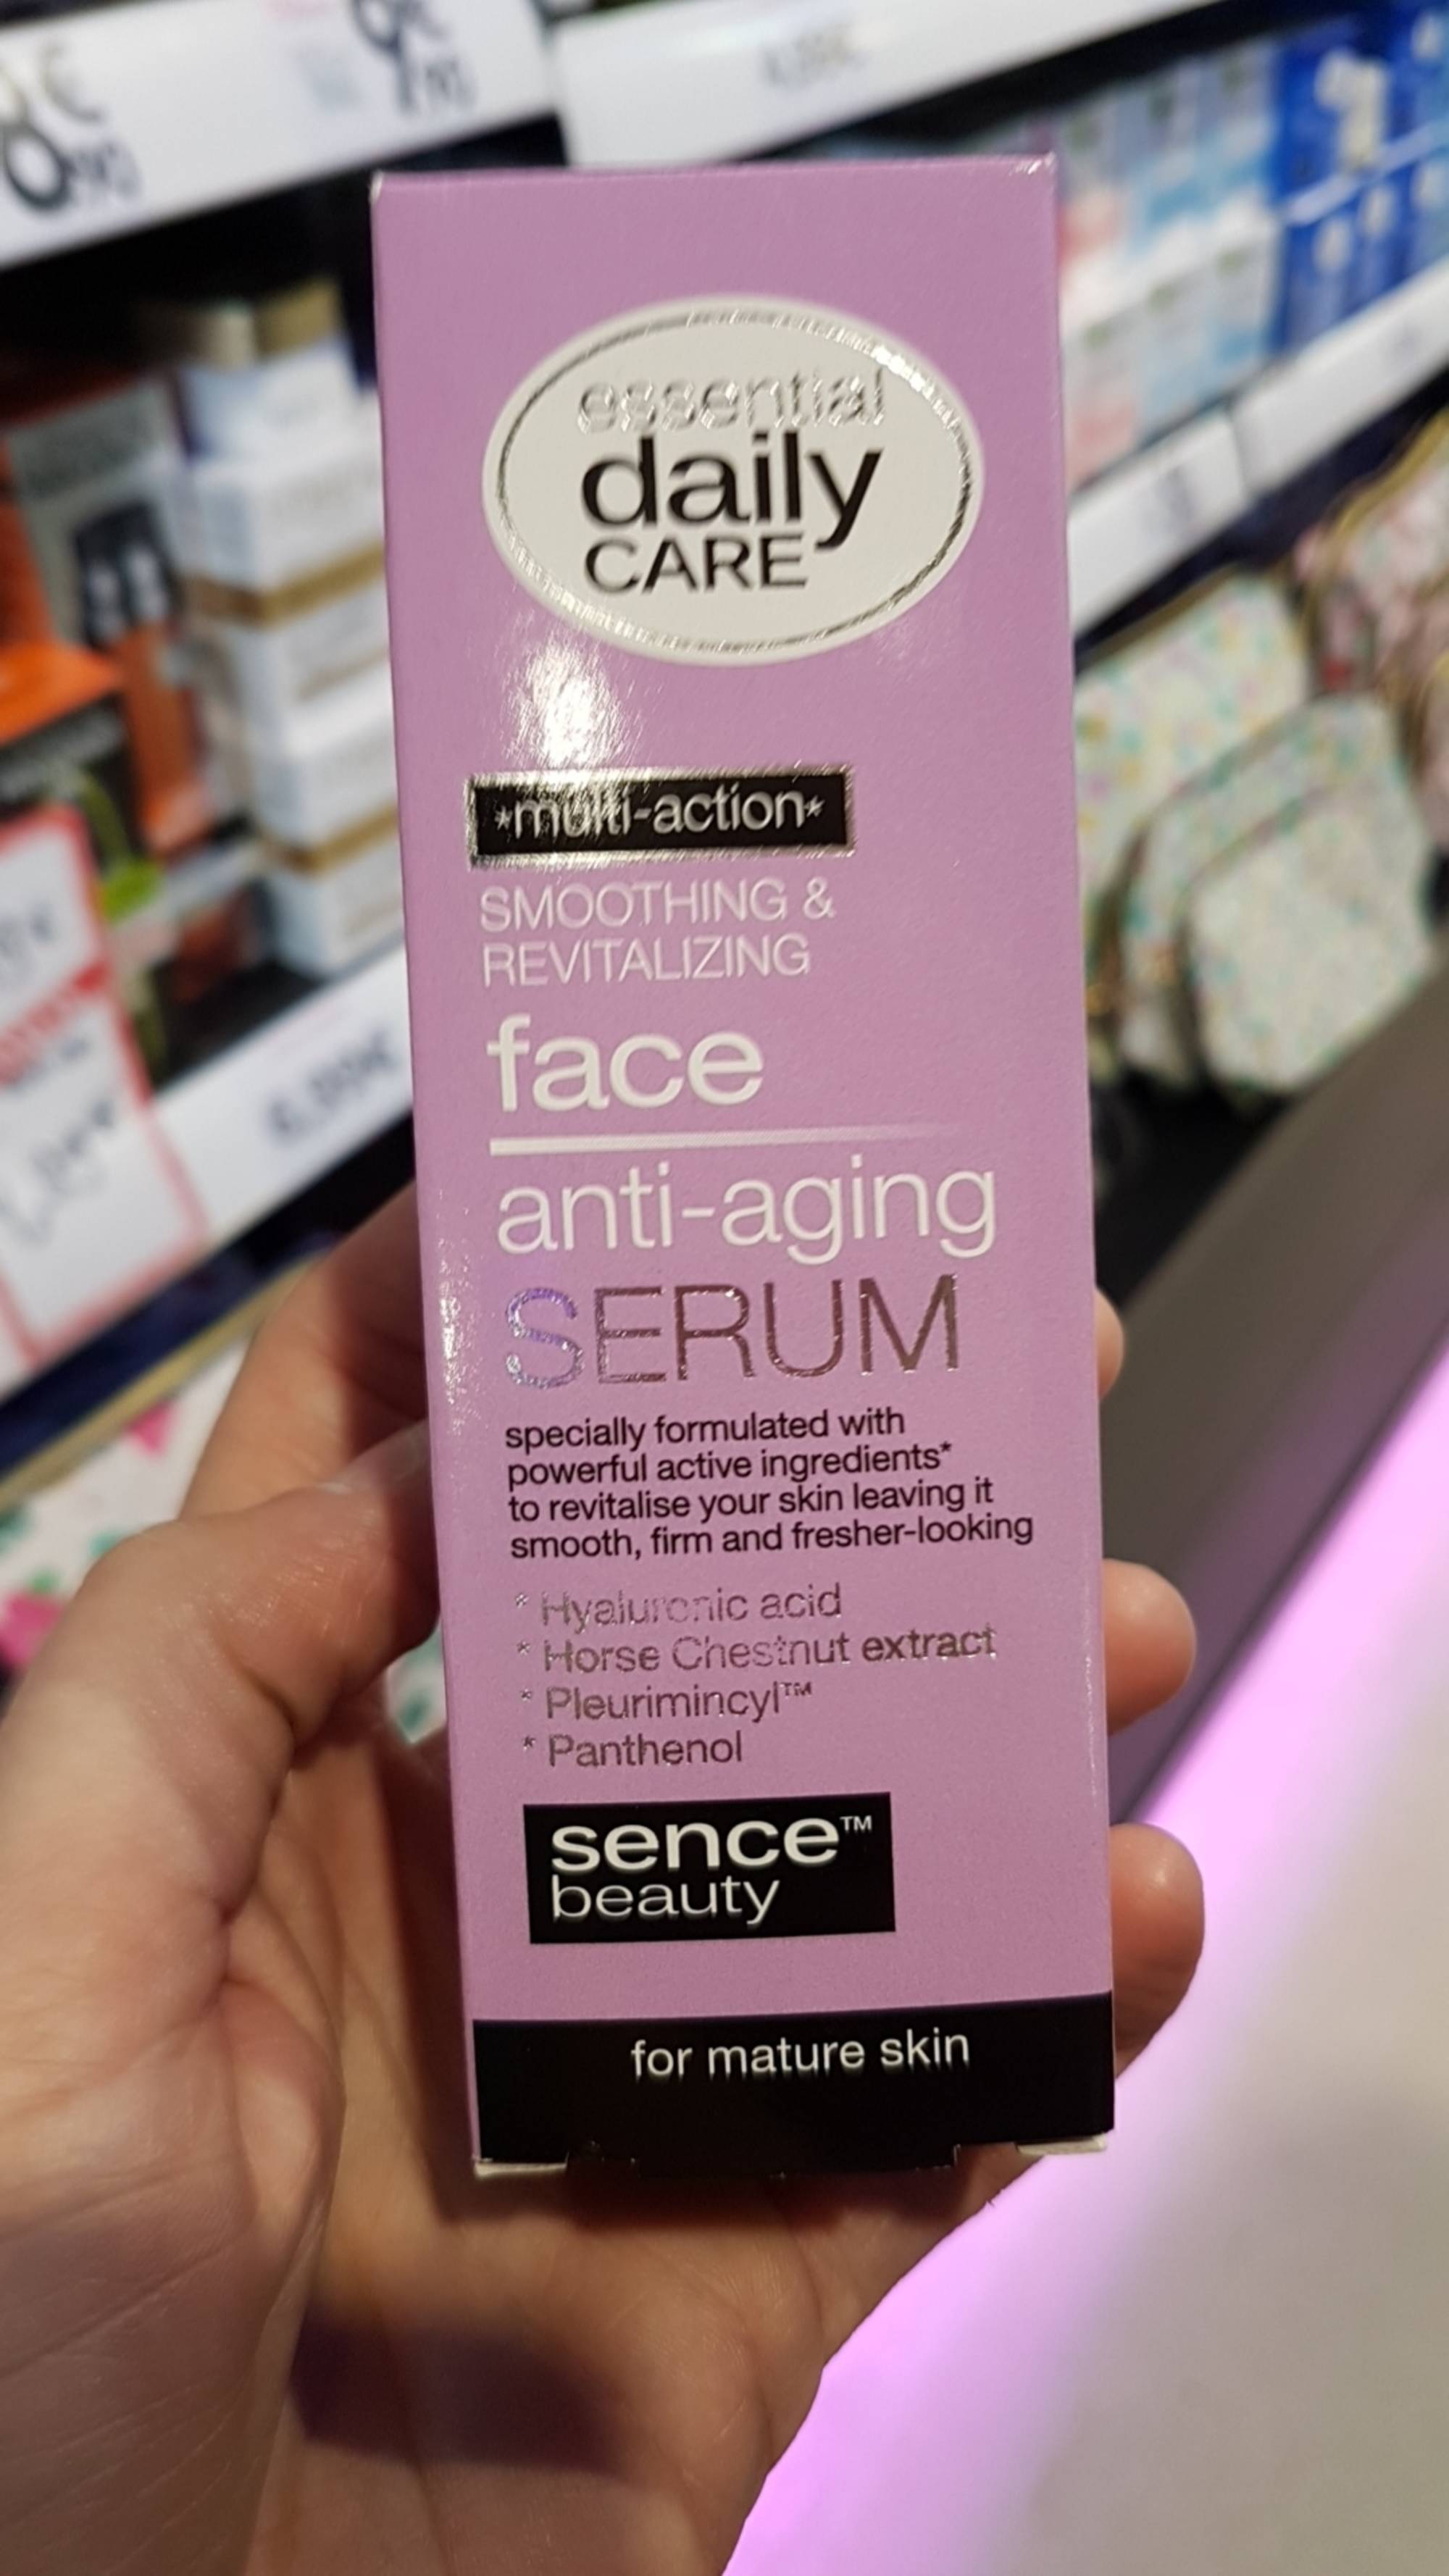 SENCE BEAUTY - Essential daily care - Face anti-aging serum